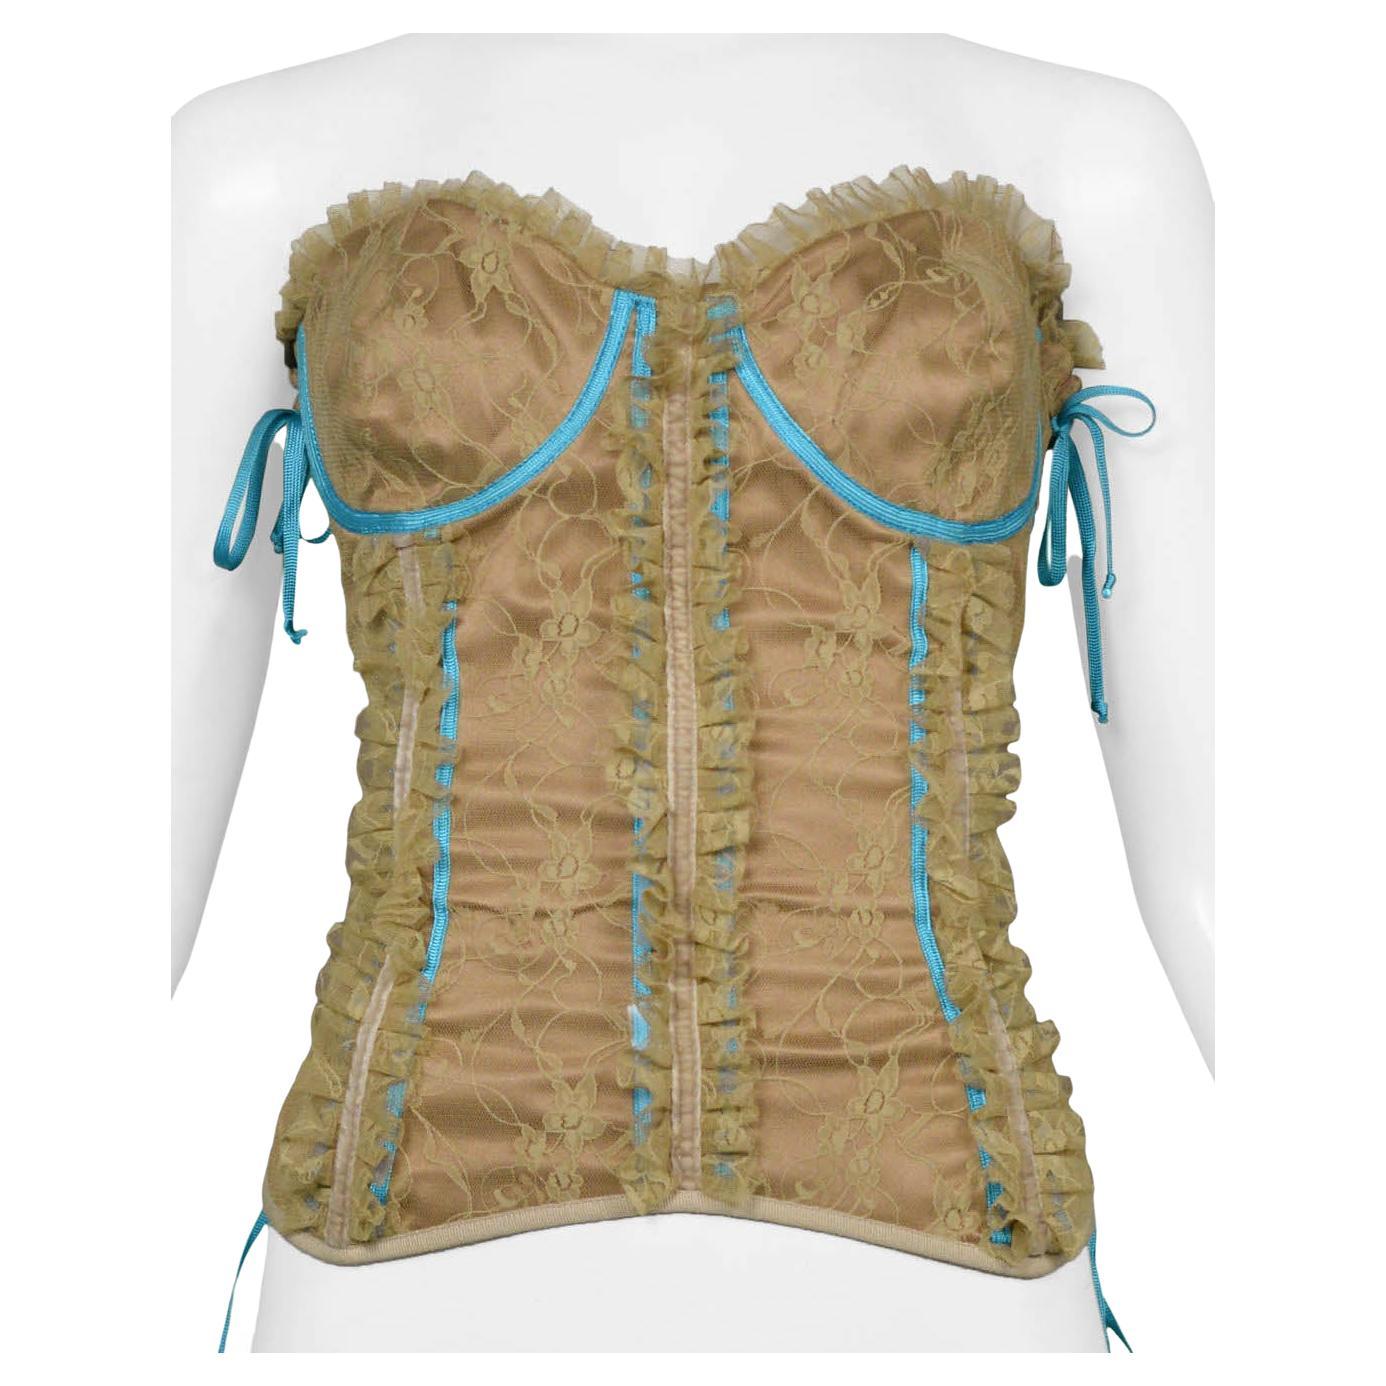 Dolce & Gabbana Lace Corset Top With Blue Laces 2002 For Sale